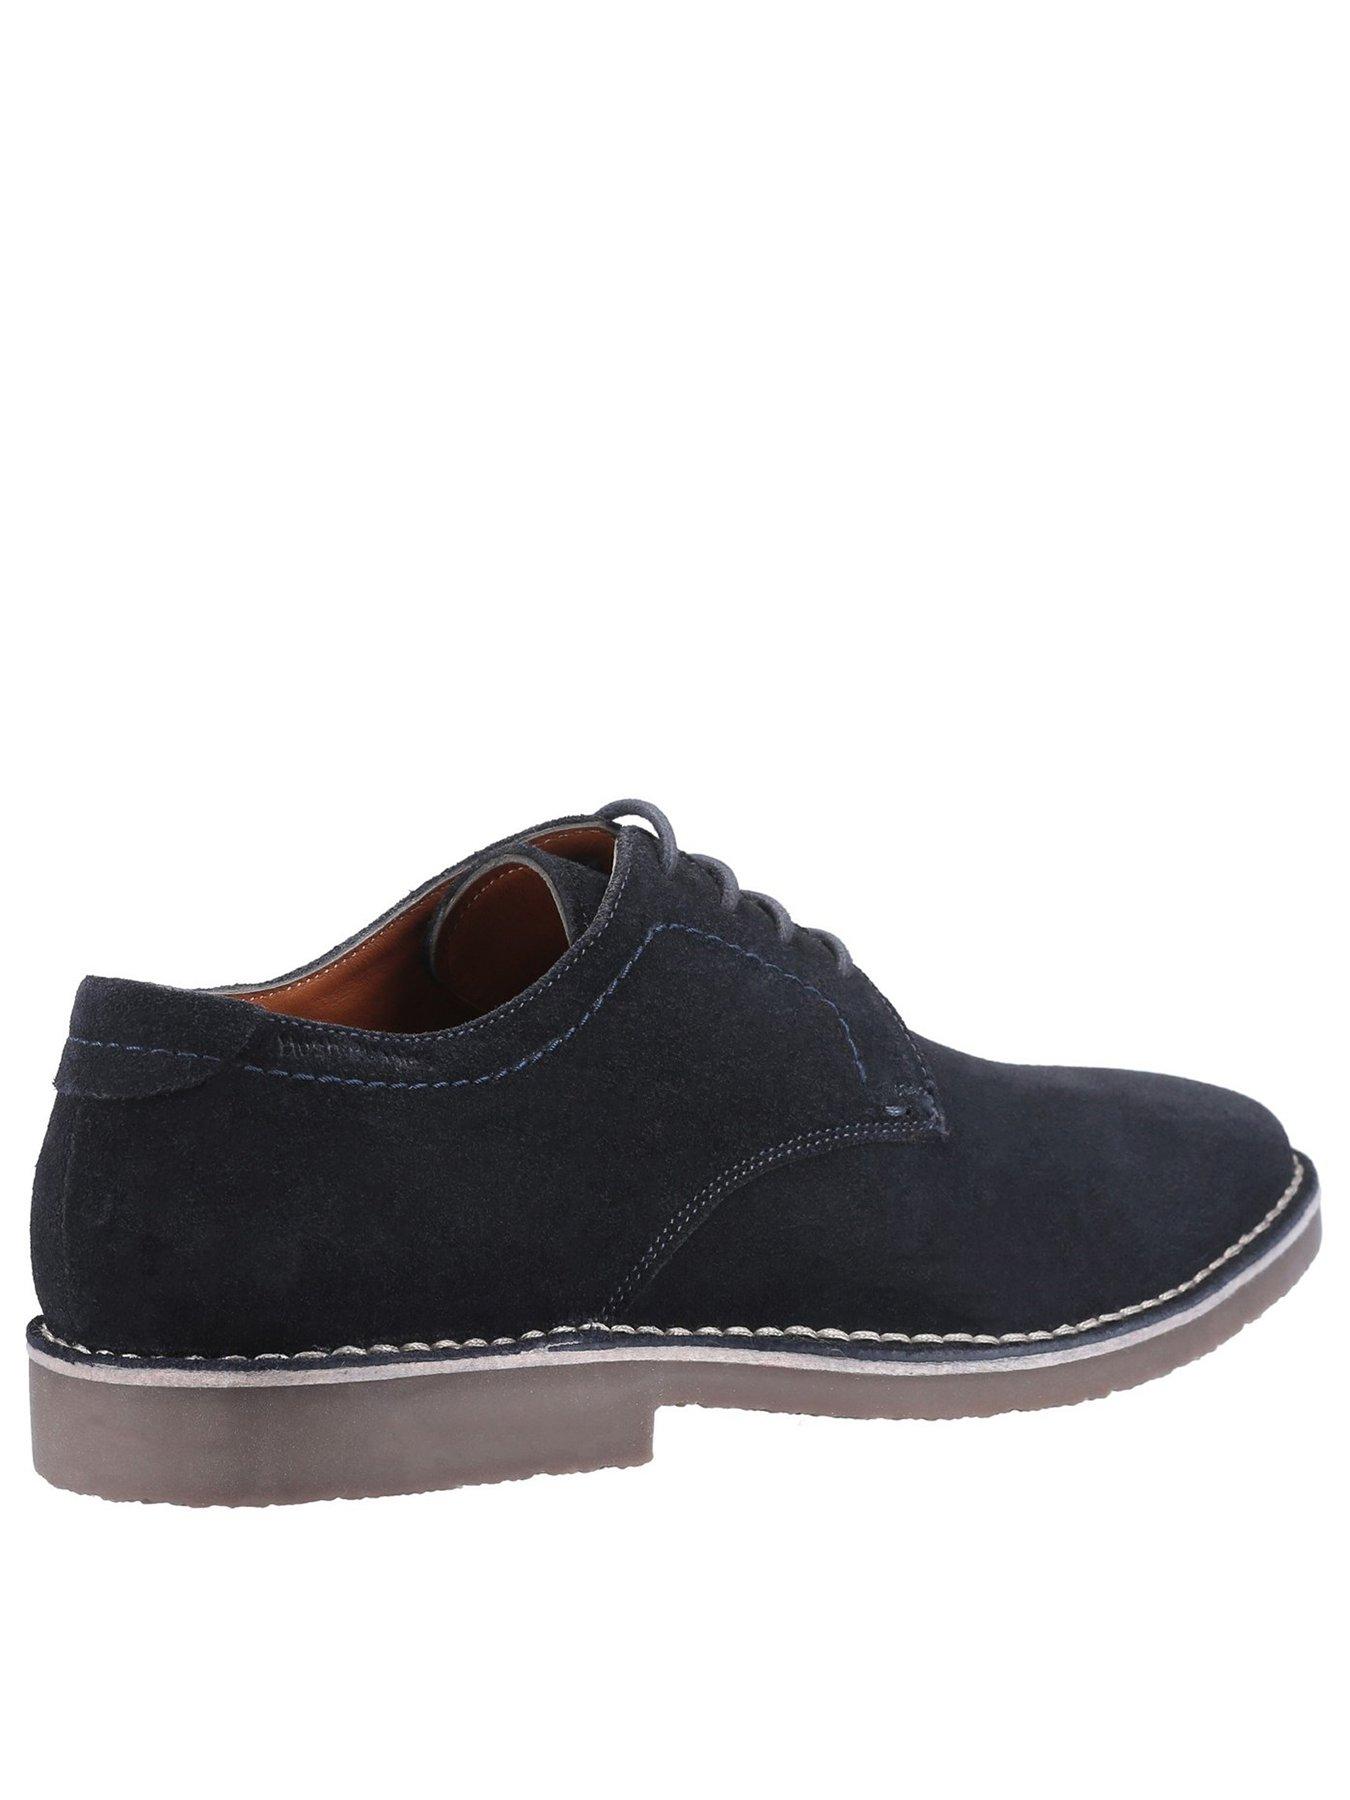 Hush Puppies Archie Desert Shoes - Navy | very.co.uk